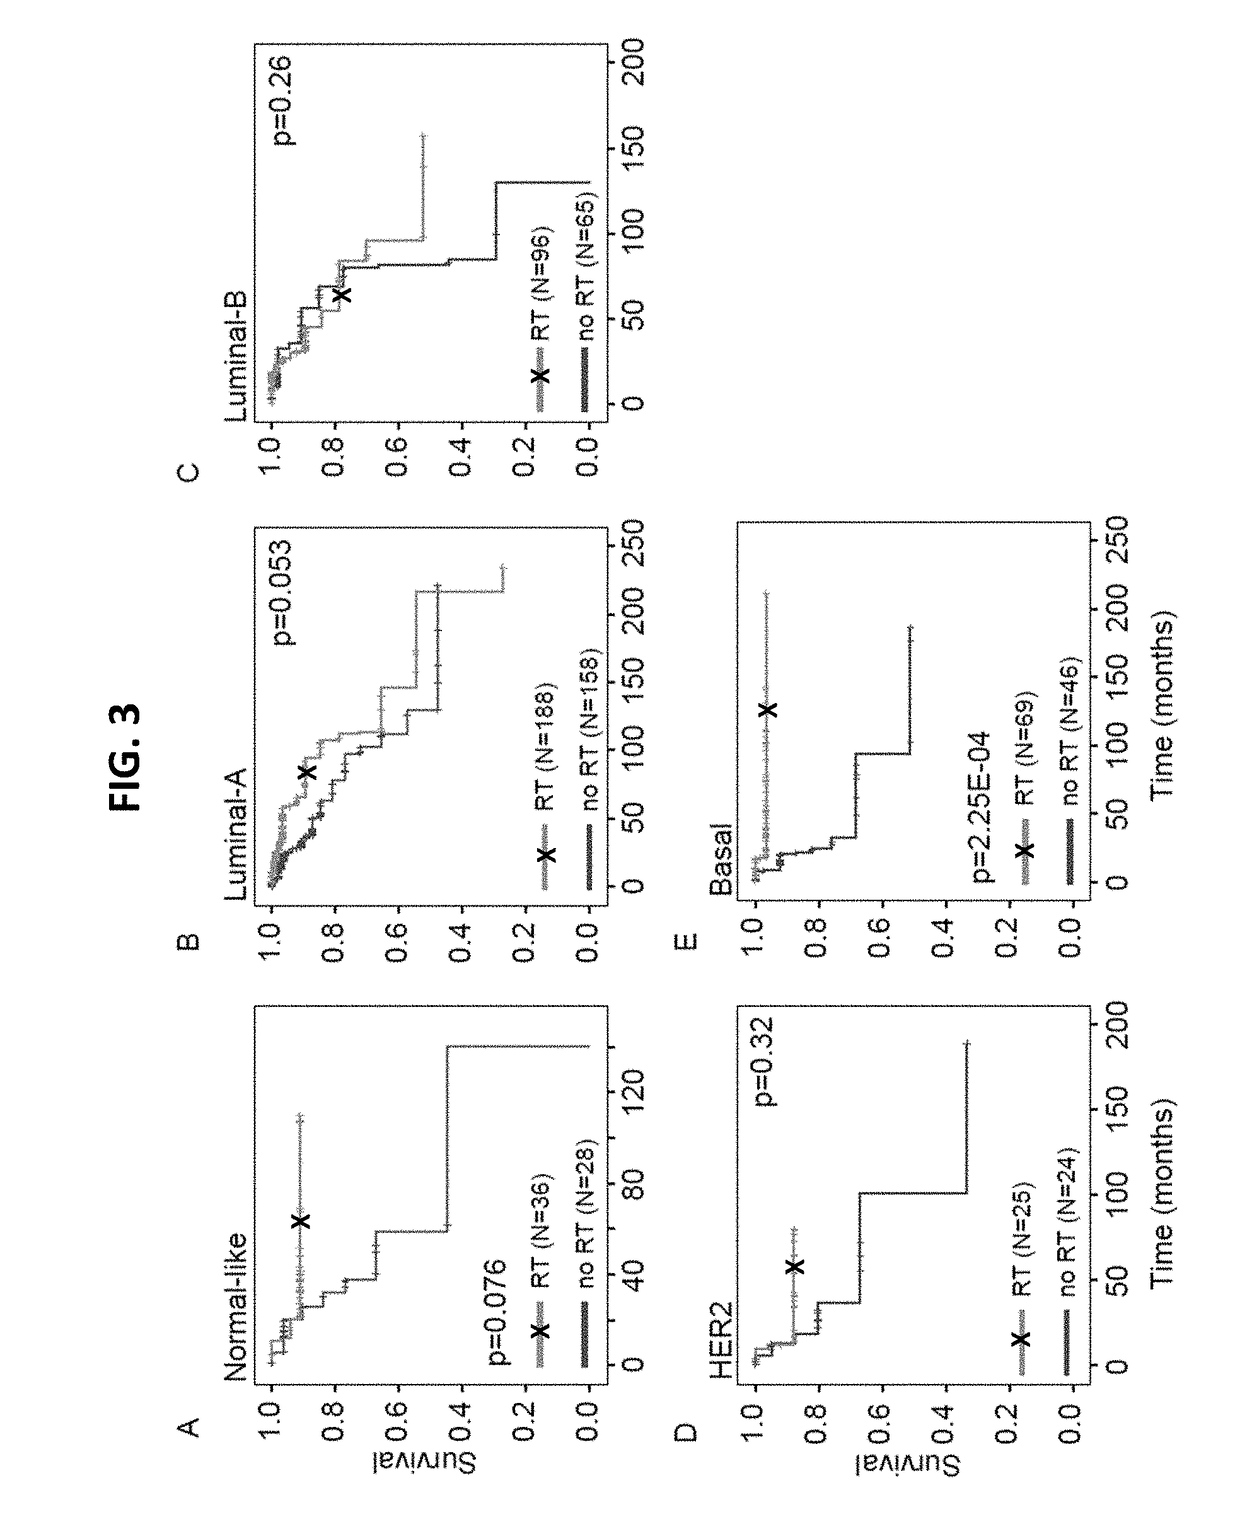 Methods of Producing Gene Expression Profiles of Subjects Having Cancer and Kits for Practicing Same